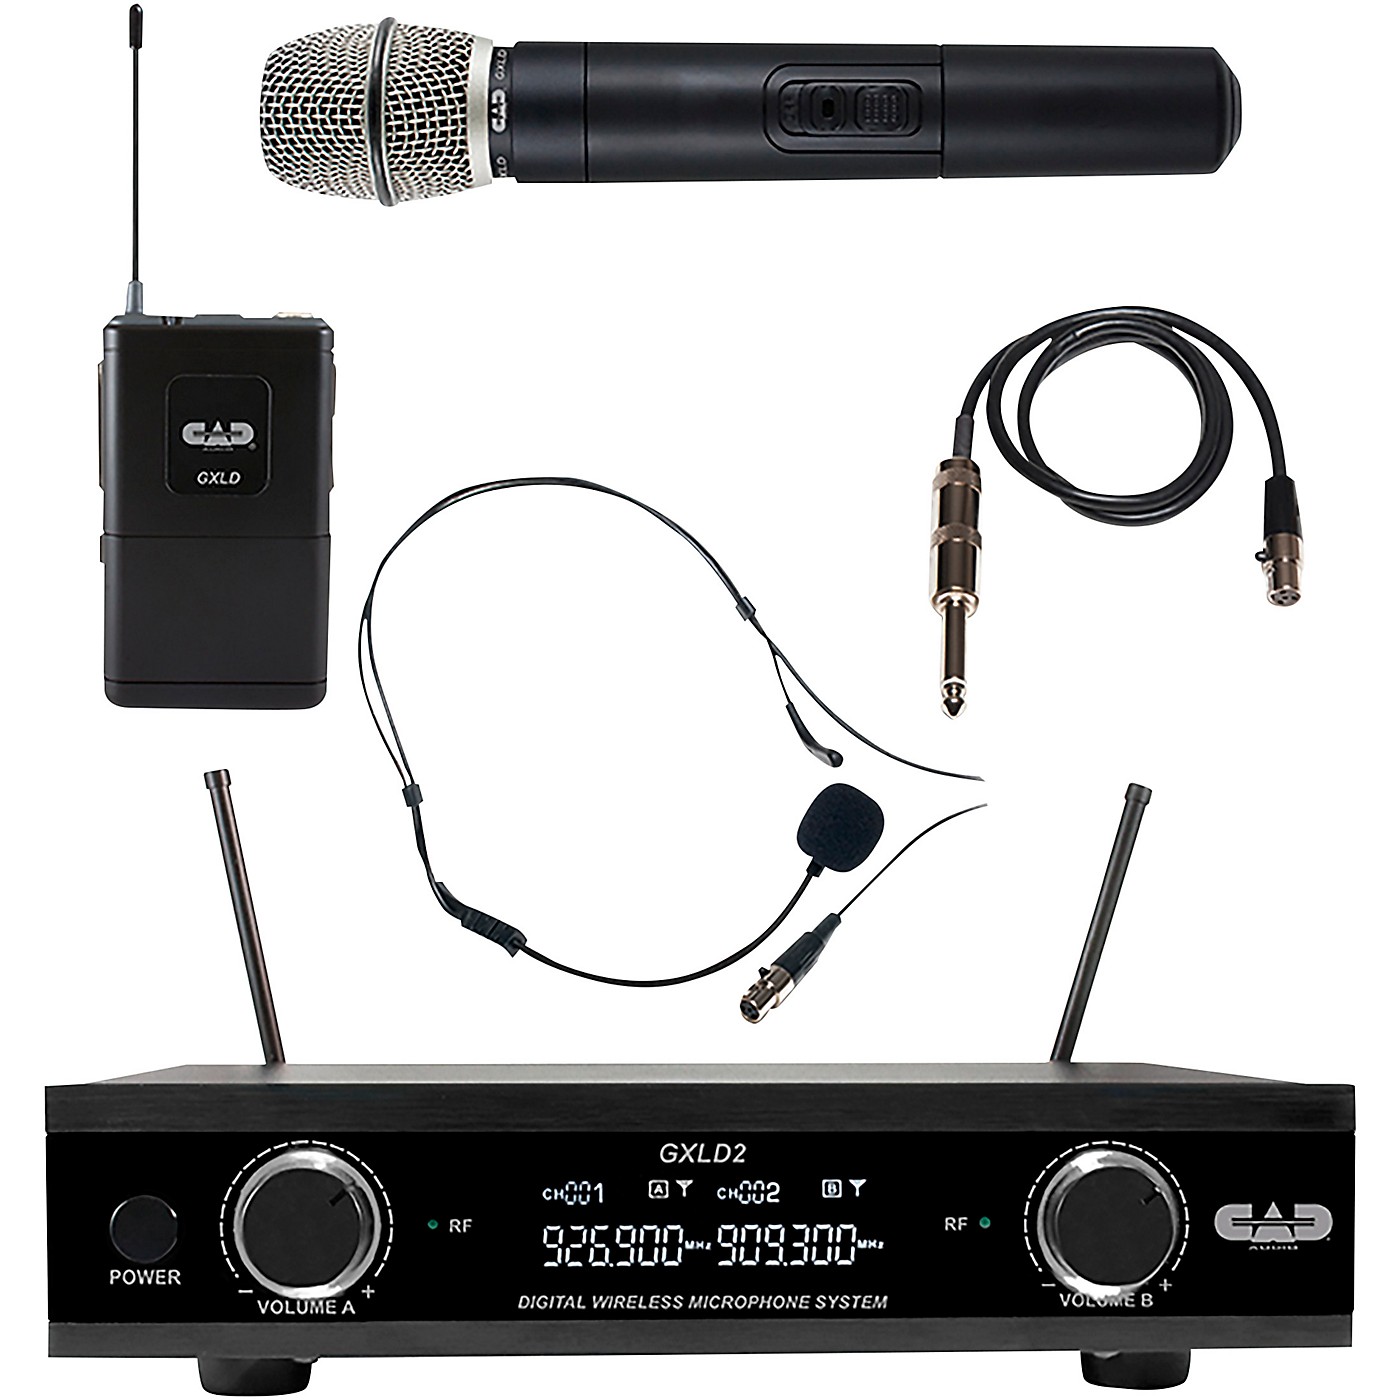 CAD GXLD2HBAH Digital Dual Channel Wireless System handheld and bodypack microphone system thumbnail